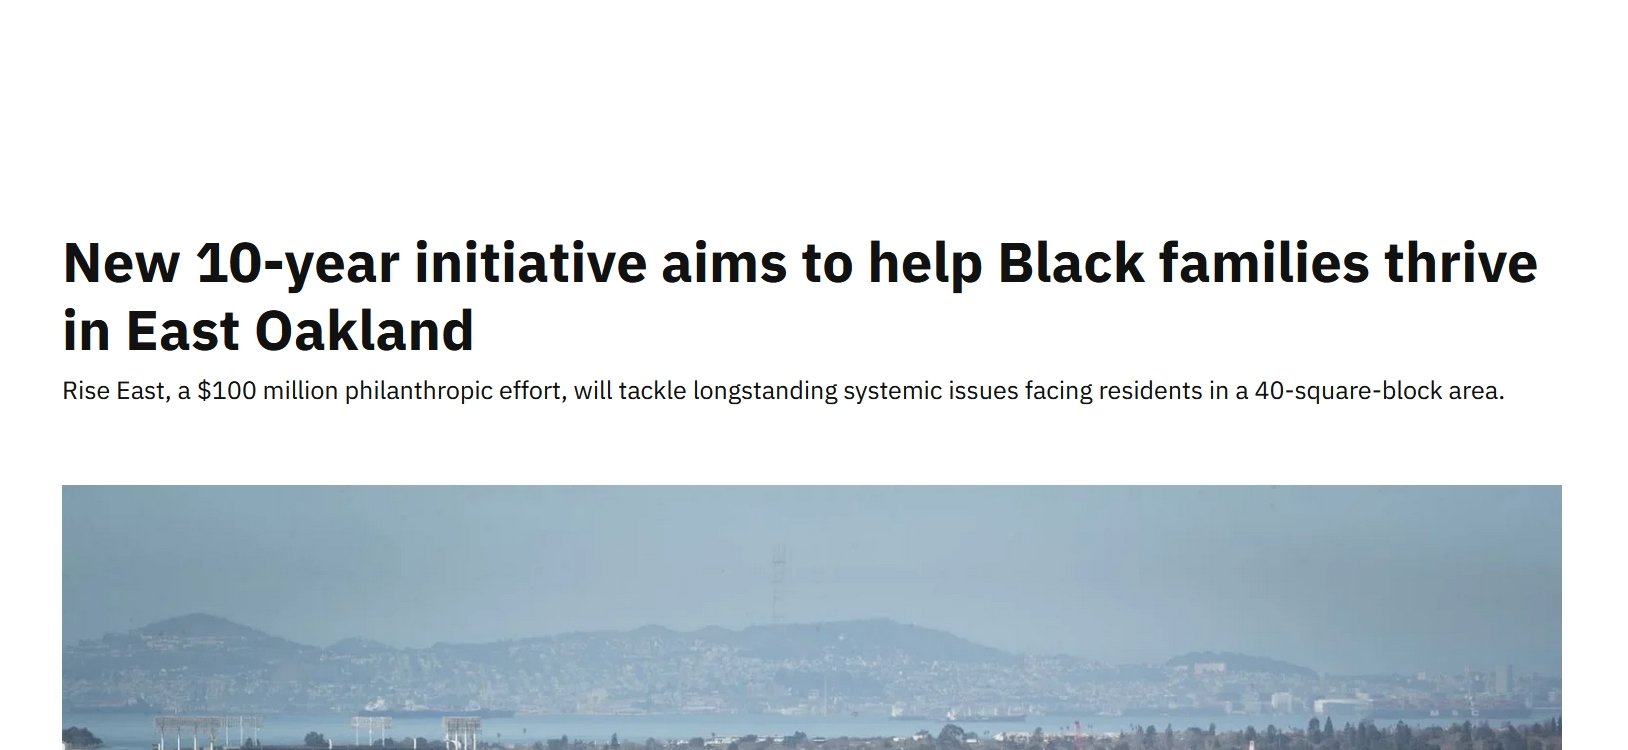 New 10-year initiative aims to help Black families thrive in East Oakland